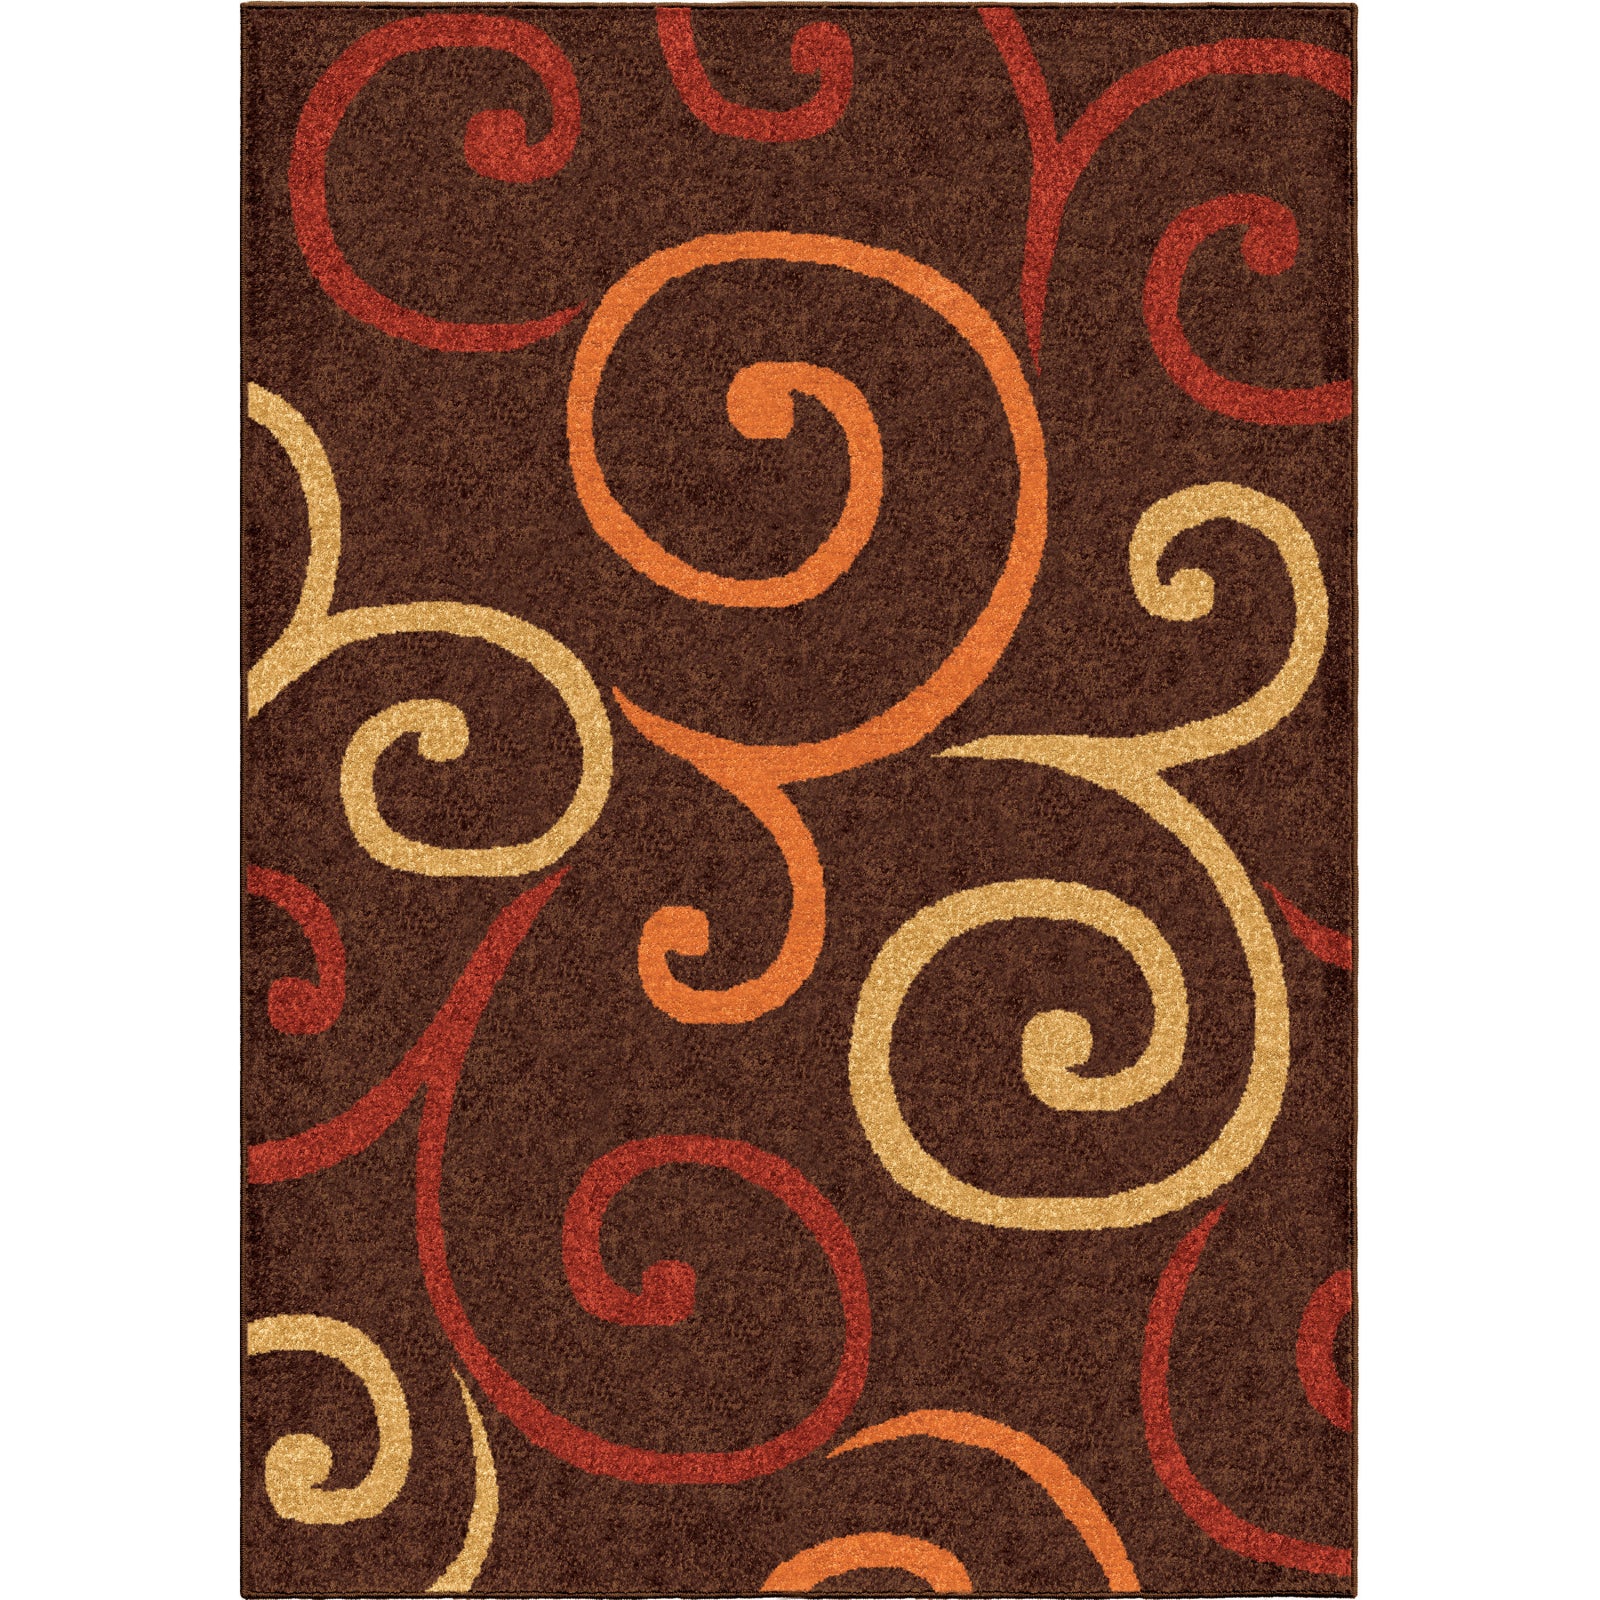 Orian Rugs Promise Multi Whirls Brown Area Rug main image